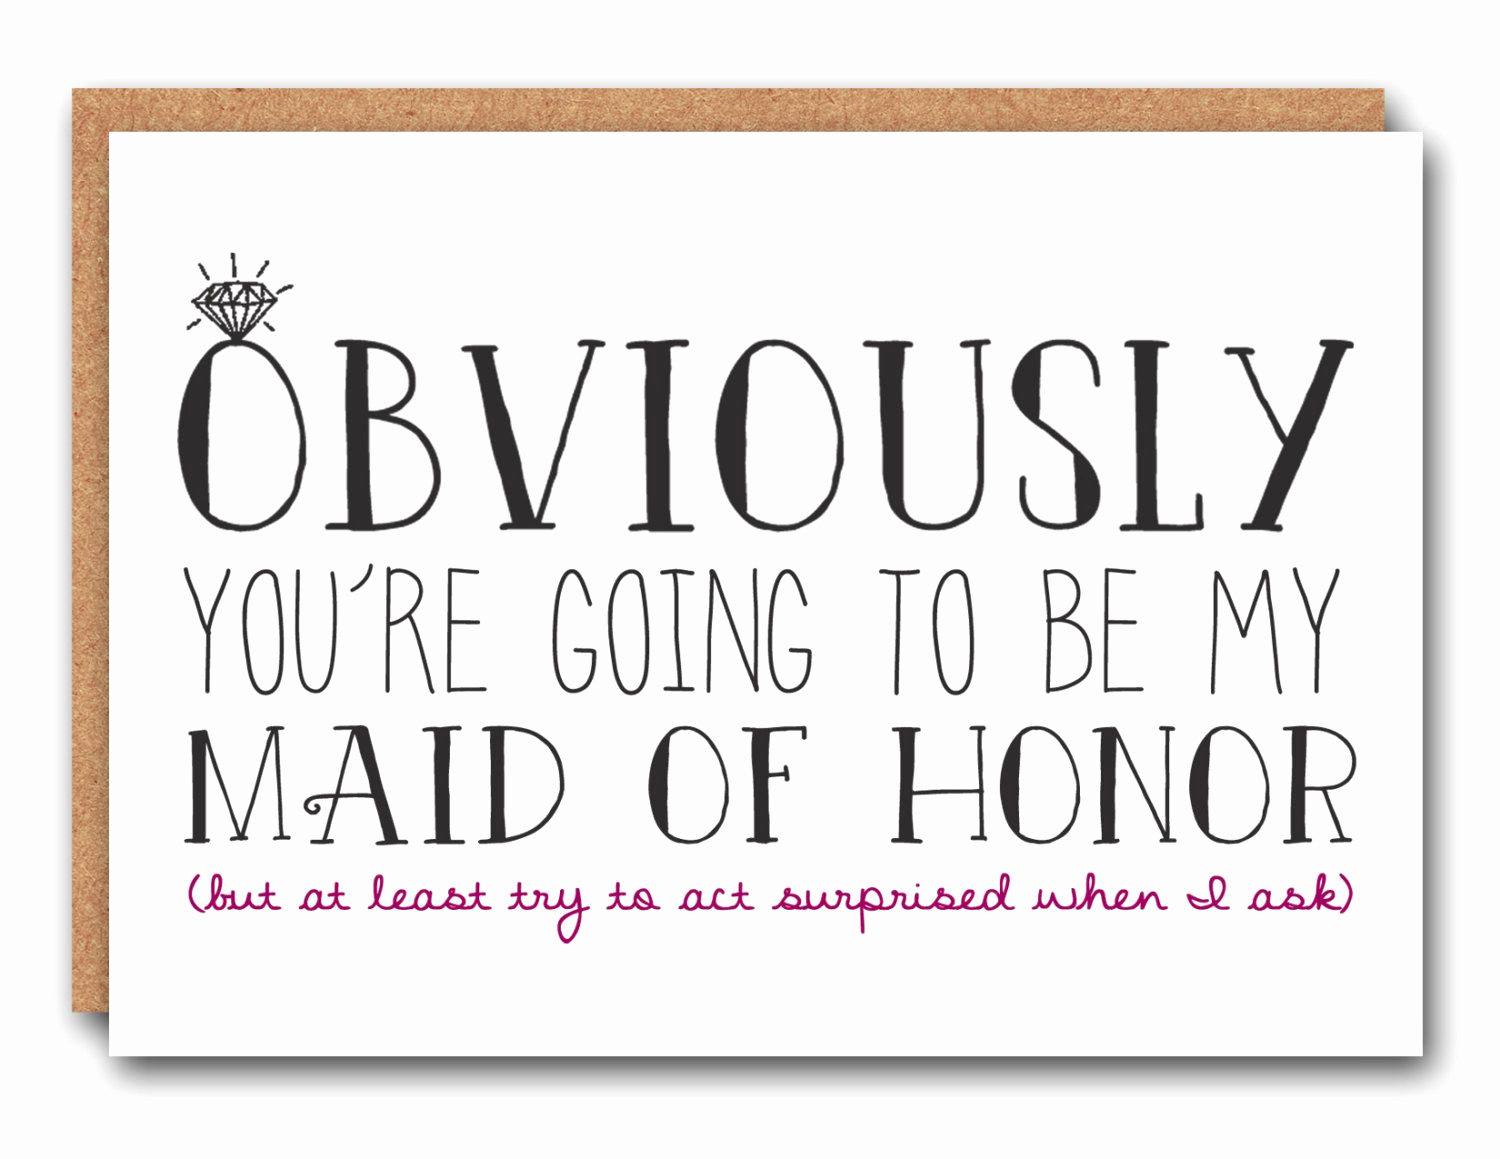 Maid Of Honor Invitation Ideas Unique Obviously You Re Going to Be My Maid Of Honor Wedding